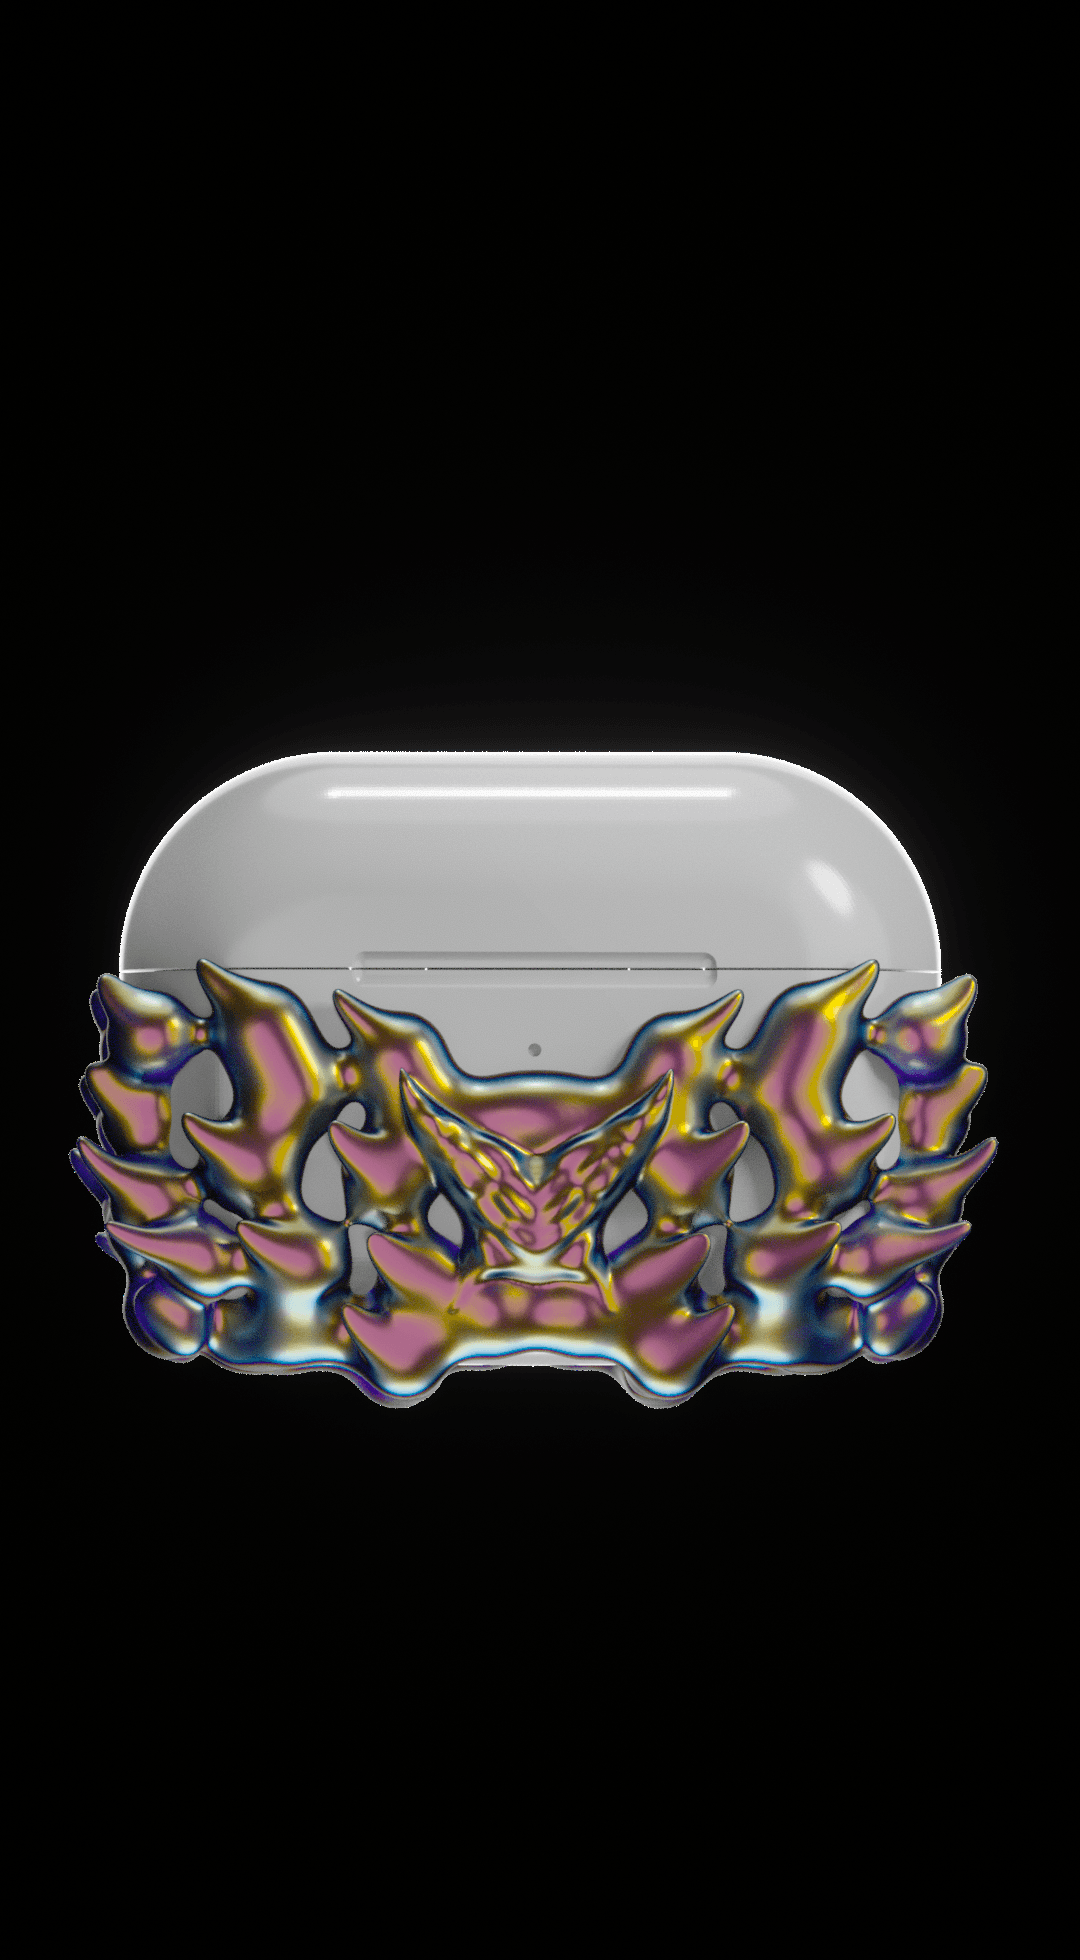 #14 ABSTRACT AIRPODS PRO 1/2 CASE 3d model